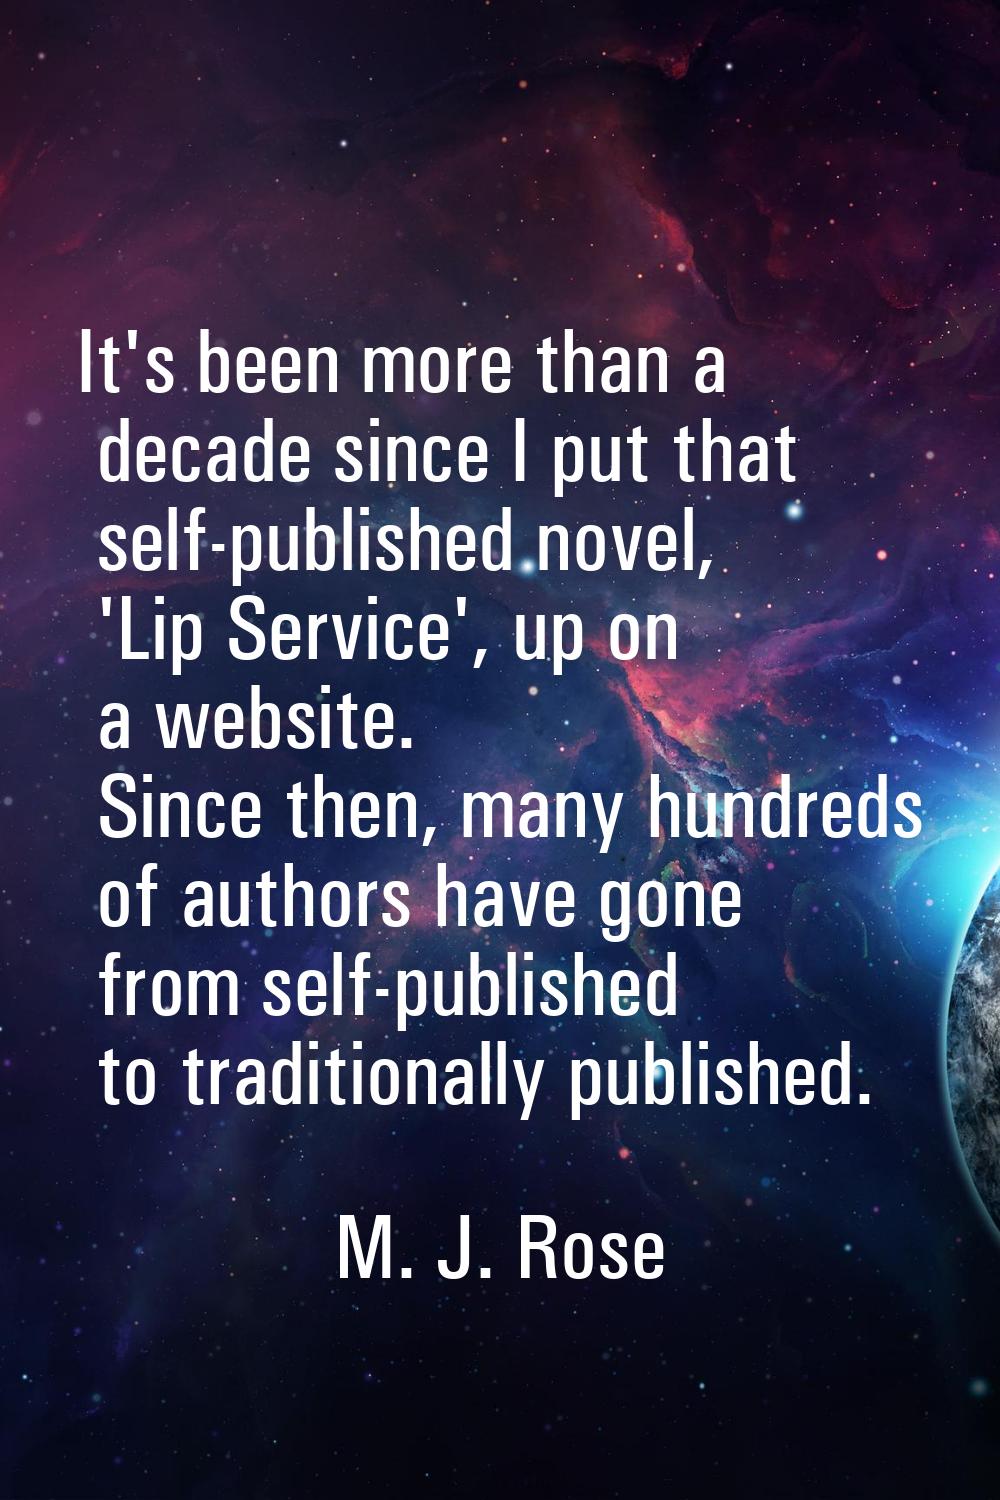 It's been more than a decade since I put that self-published novel, 'Lip Service', up on a website.